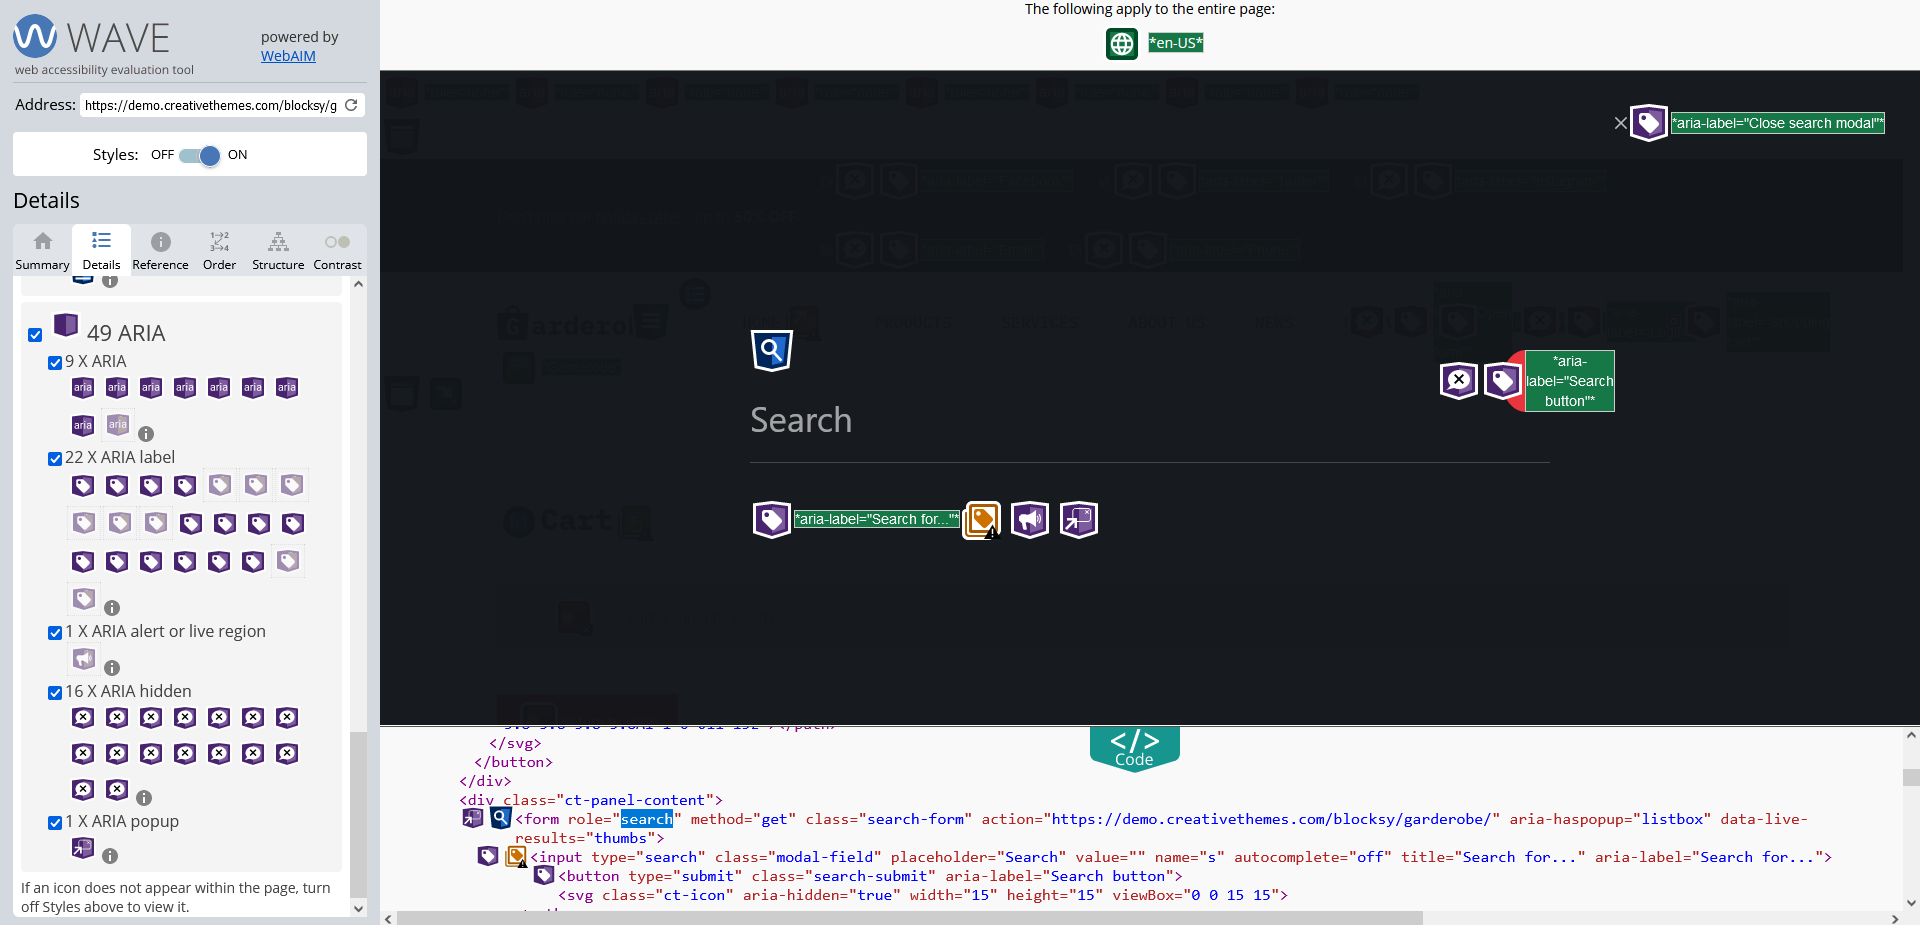 Blocksy's accessible search form, visualized in the WAVE tool, screenshot